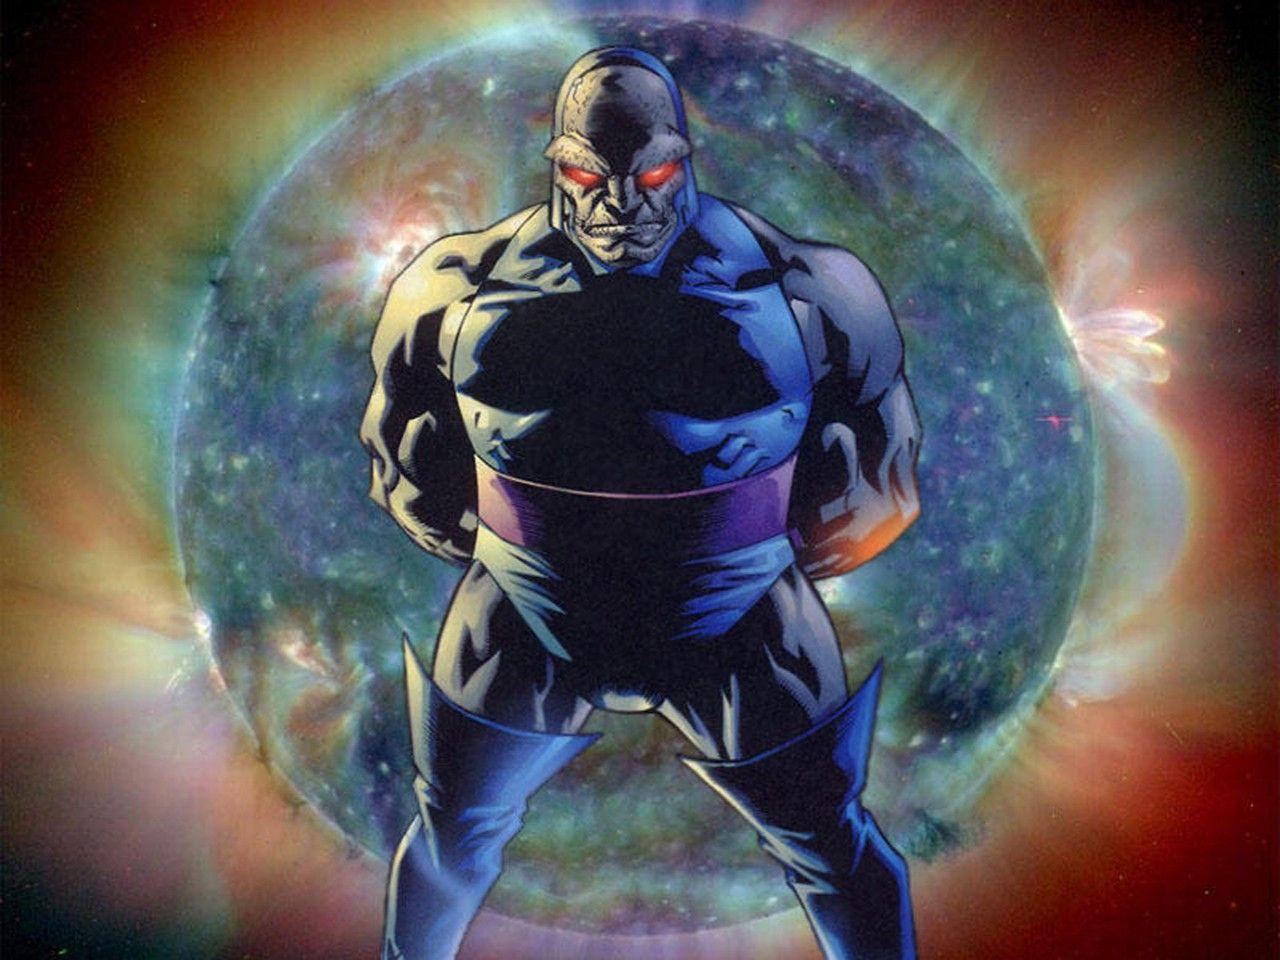 Darkseid Wants To Rule The World. Ultimate Super Villains